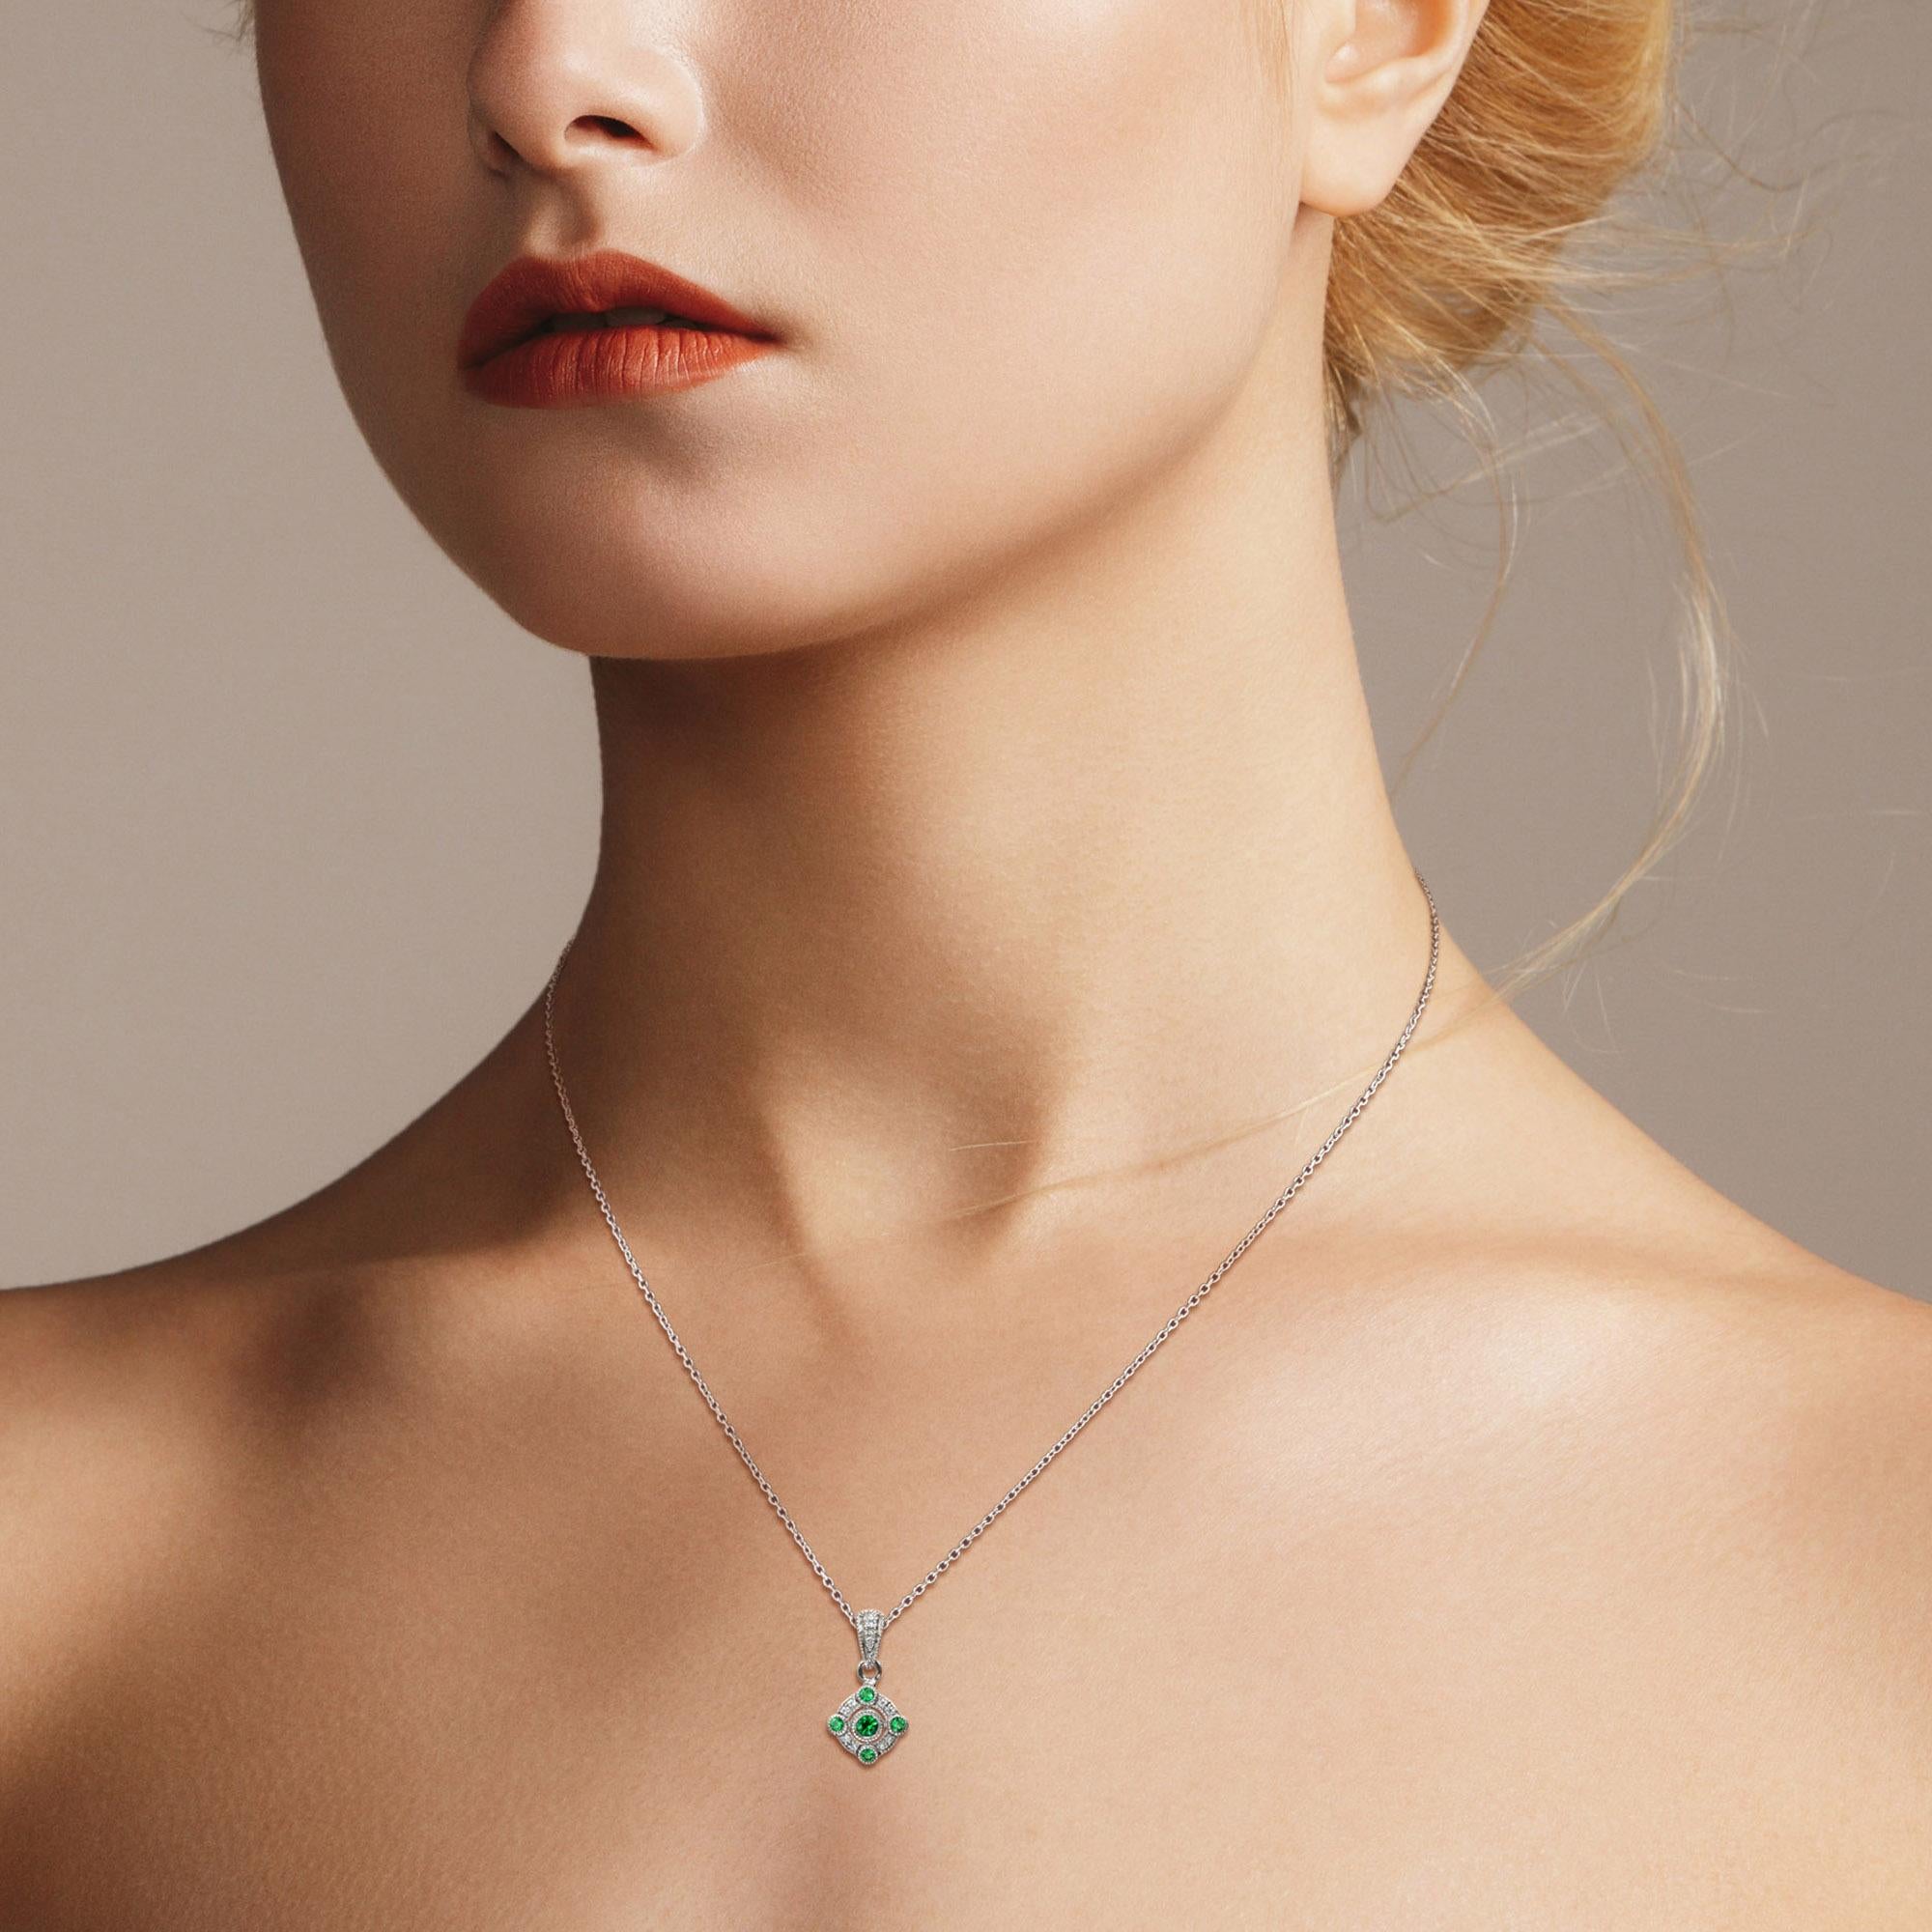 With pretty vintage styling, this pendant makes the perfect finishing touch to an outfit. Featuring five emeralds and ten round brilliant cut diamonds that give a subtle, glittering appearance. The edges of the design have millgrain detailing to